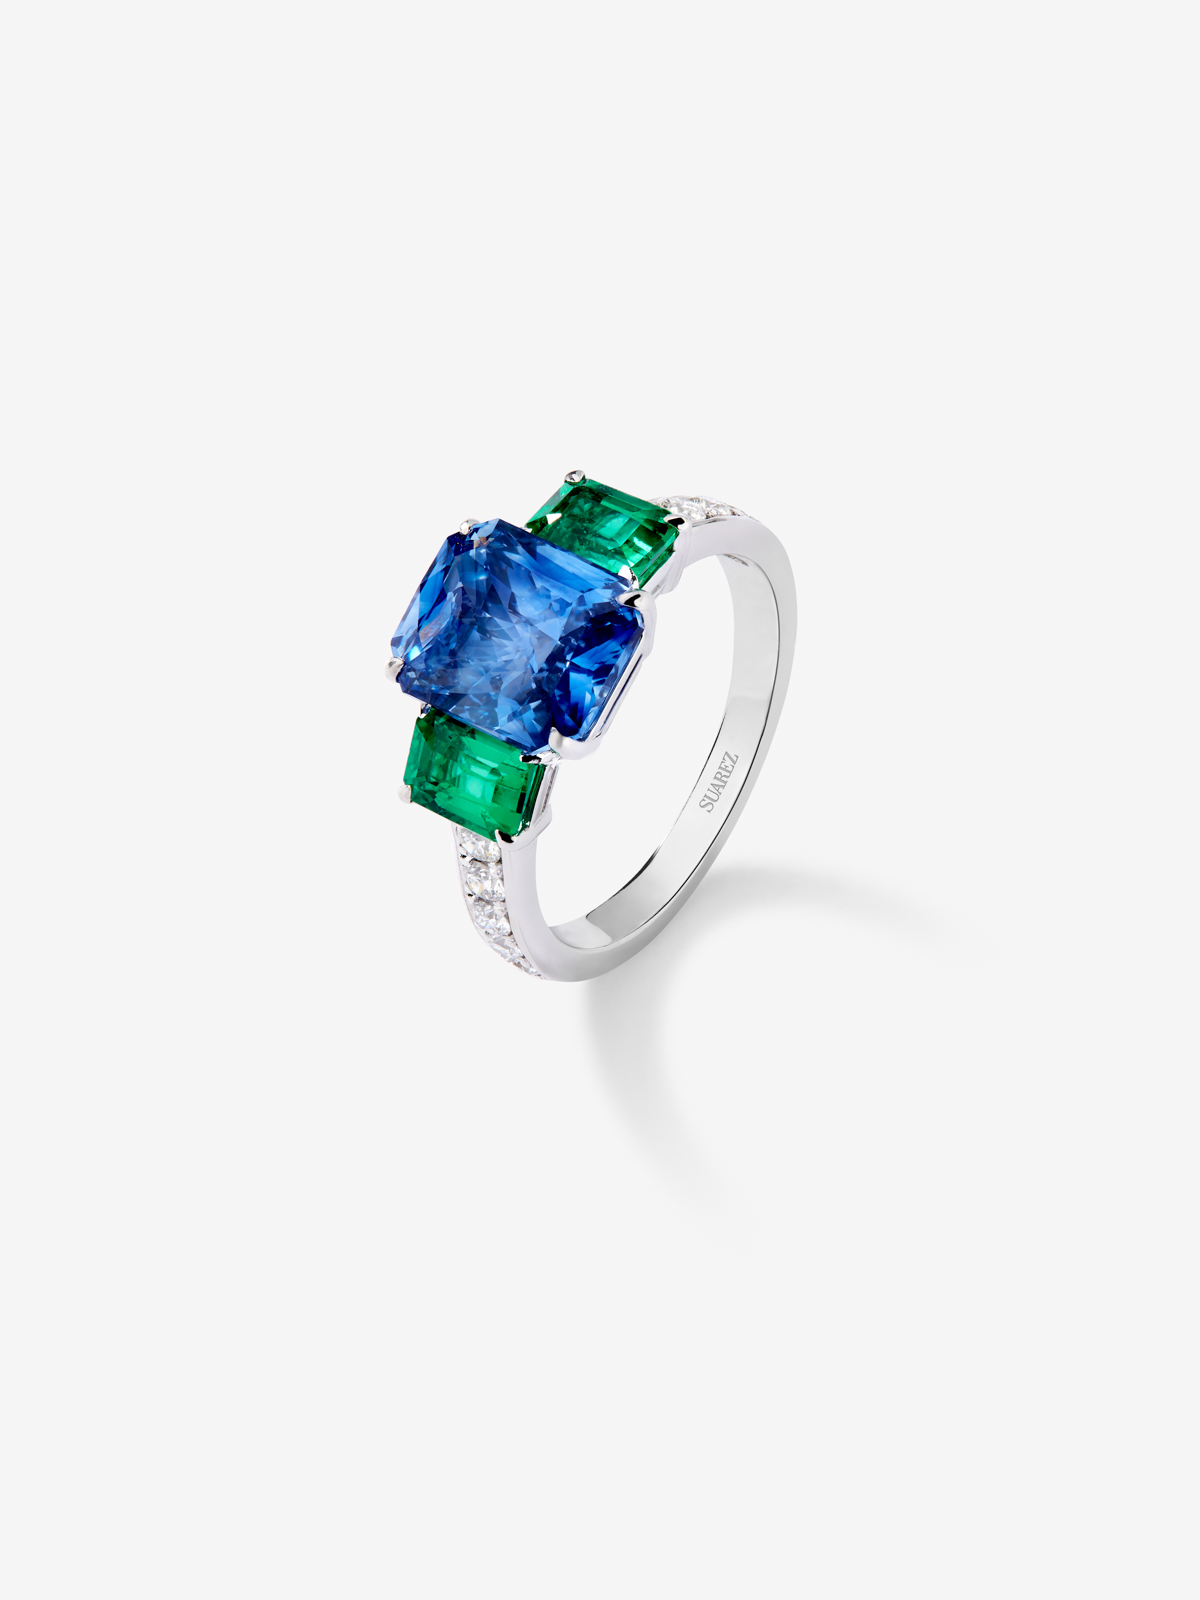 18K White Gold Tiego Ring with blue sapphire in 3.6 cts emerald size, green emeralds in octagonal size 1.12 cts and white diamonds in bright size of 0.073 cts